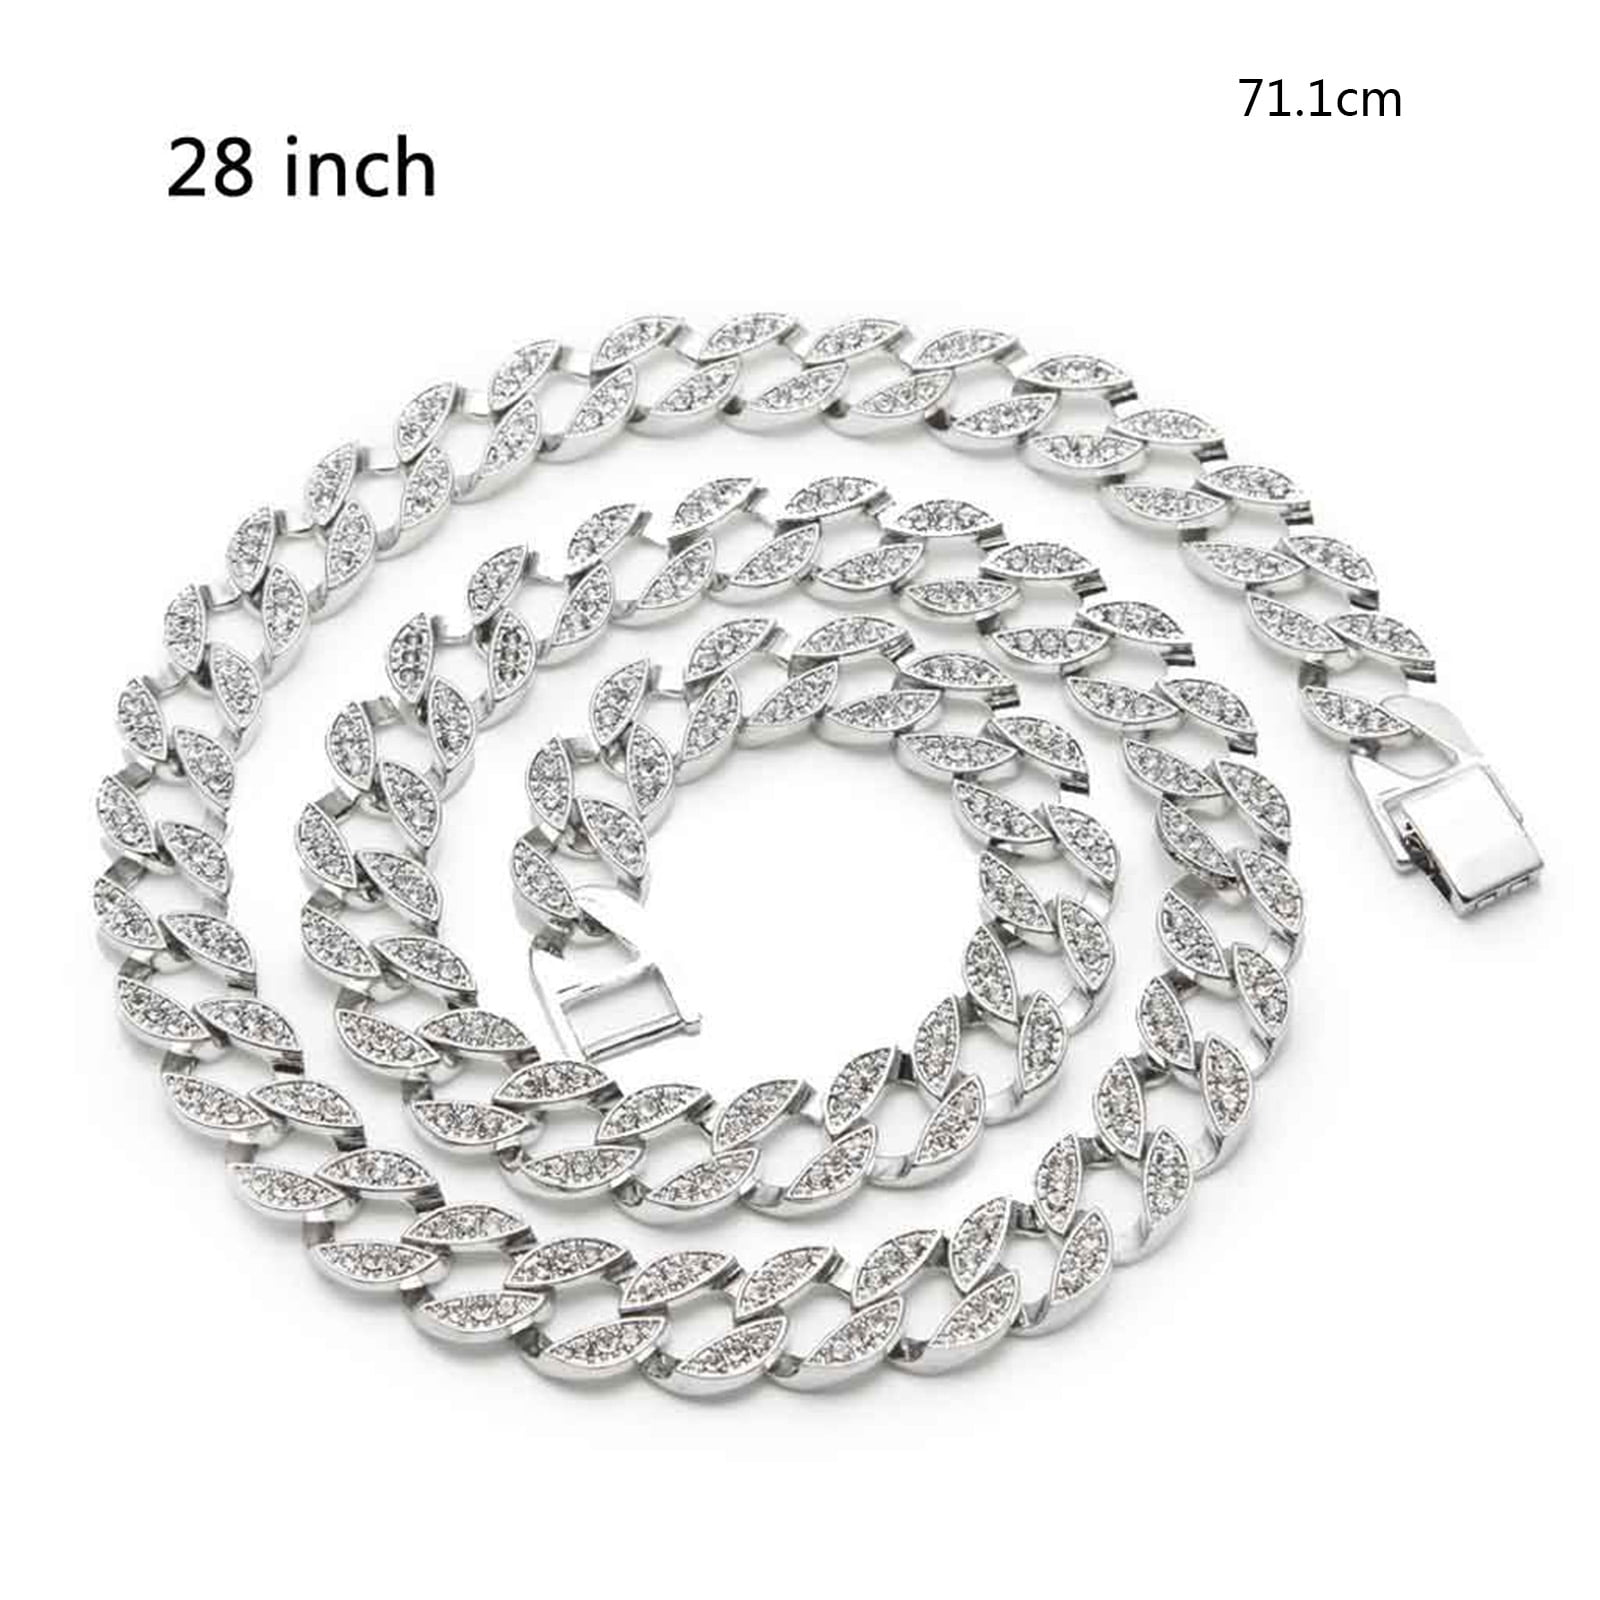 5 INCH  WHITE GOLD PLATED 4.8MM NECKLACE EXTENDER WITH 12MM LOBSTER CLAW CLASP 